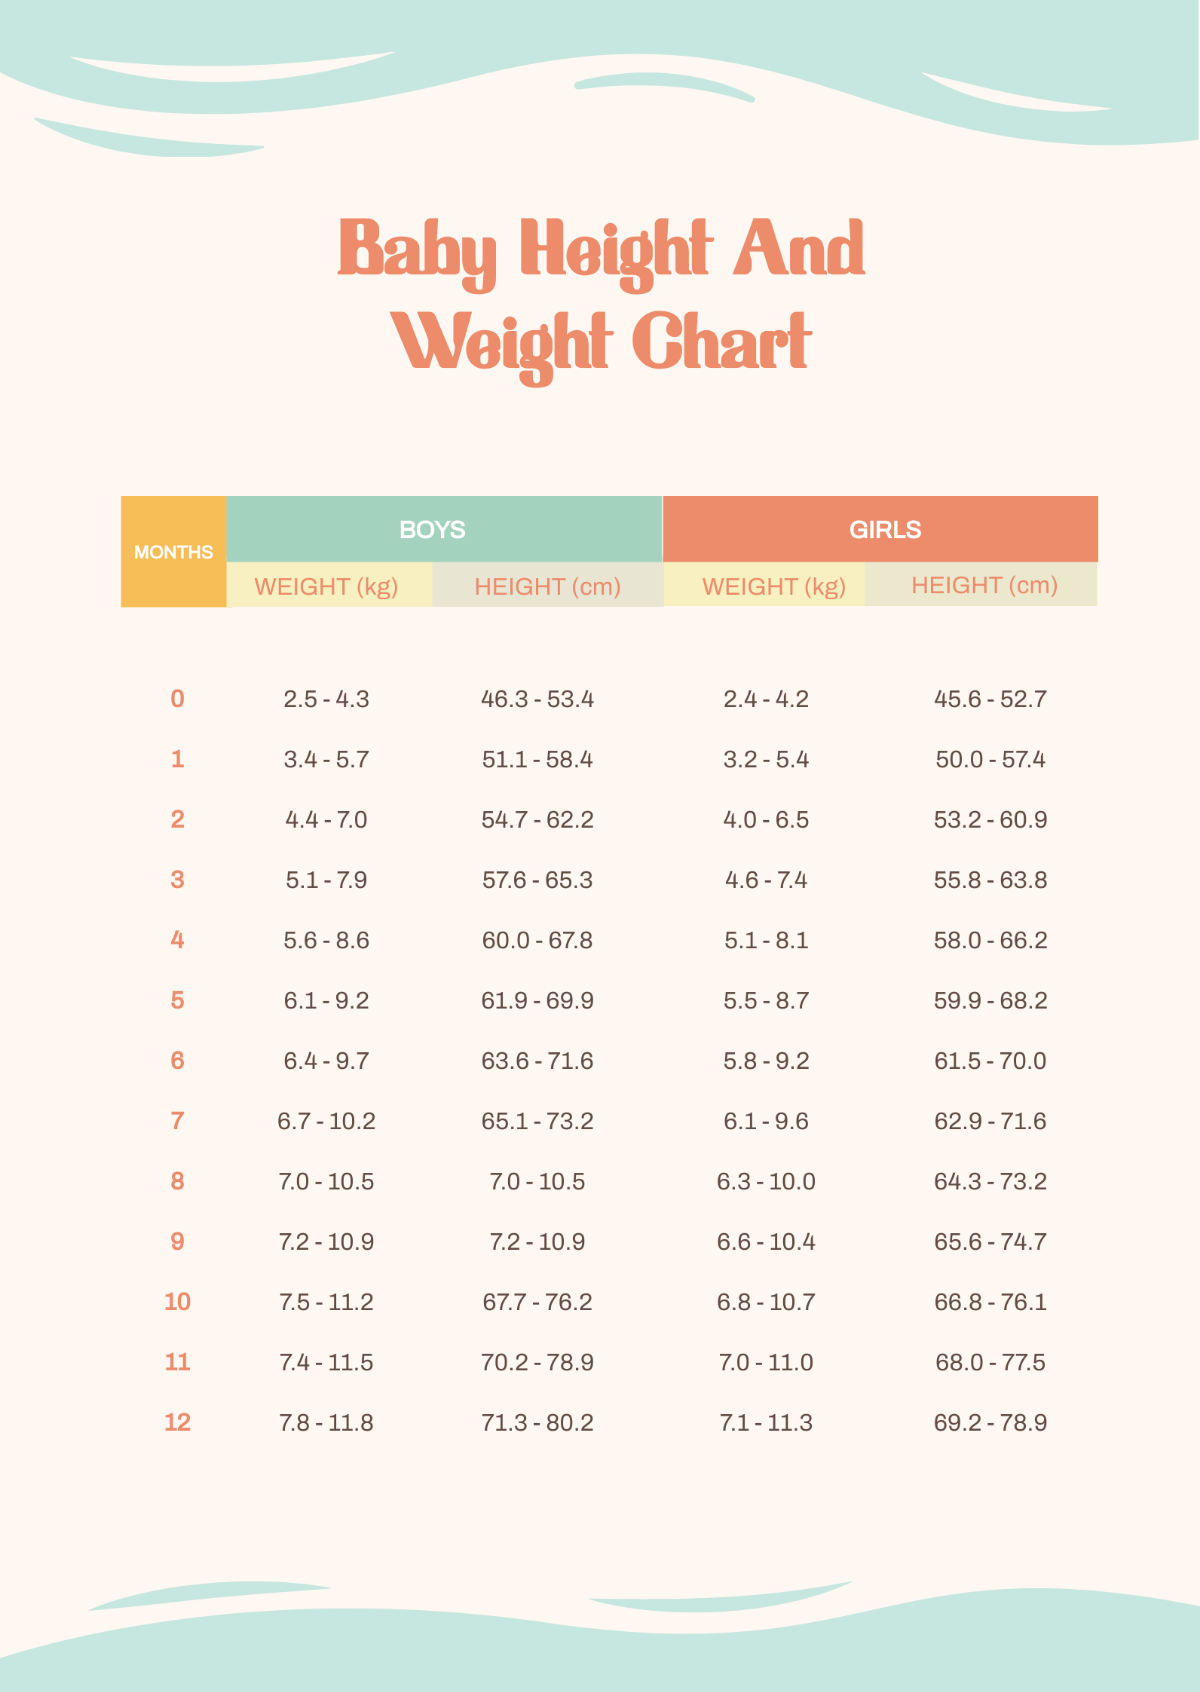 Baby Height and Weight Chart Template